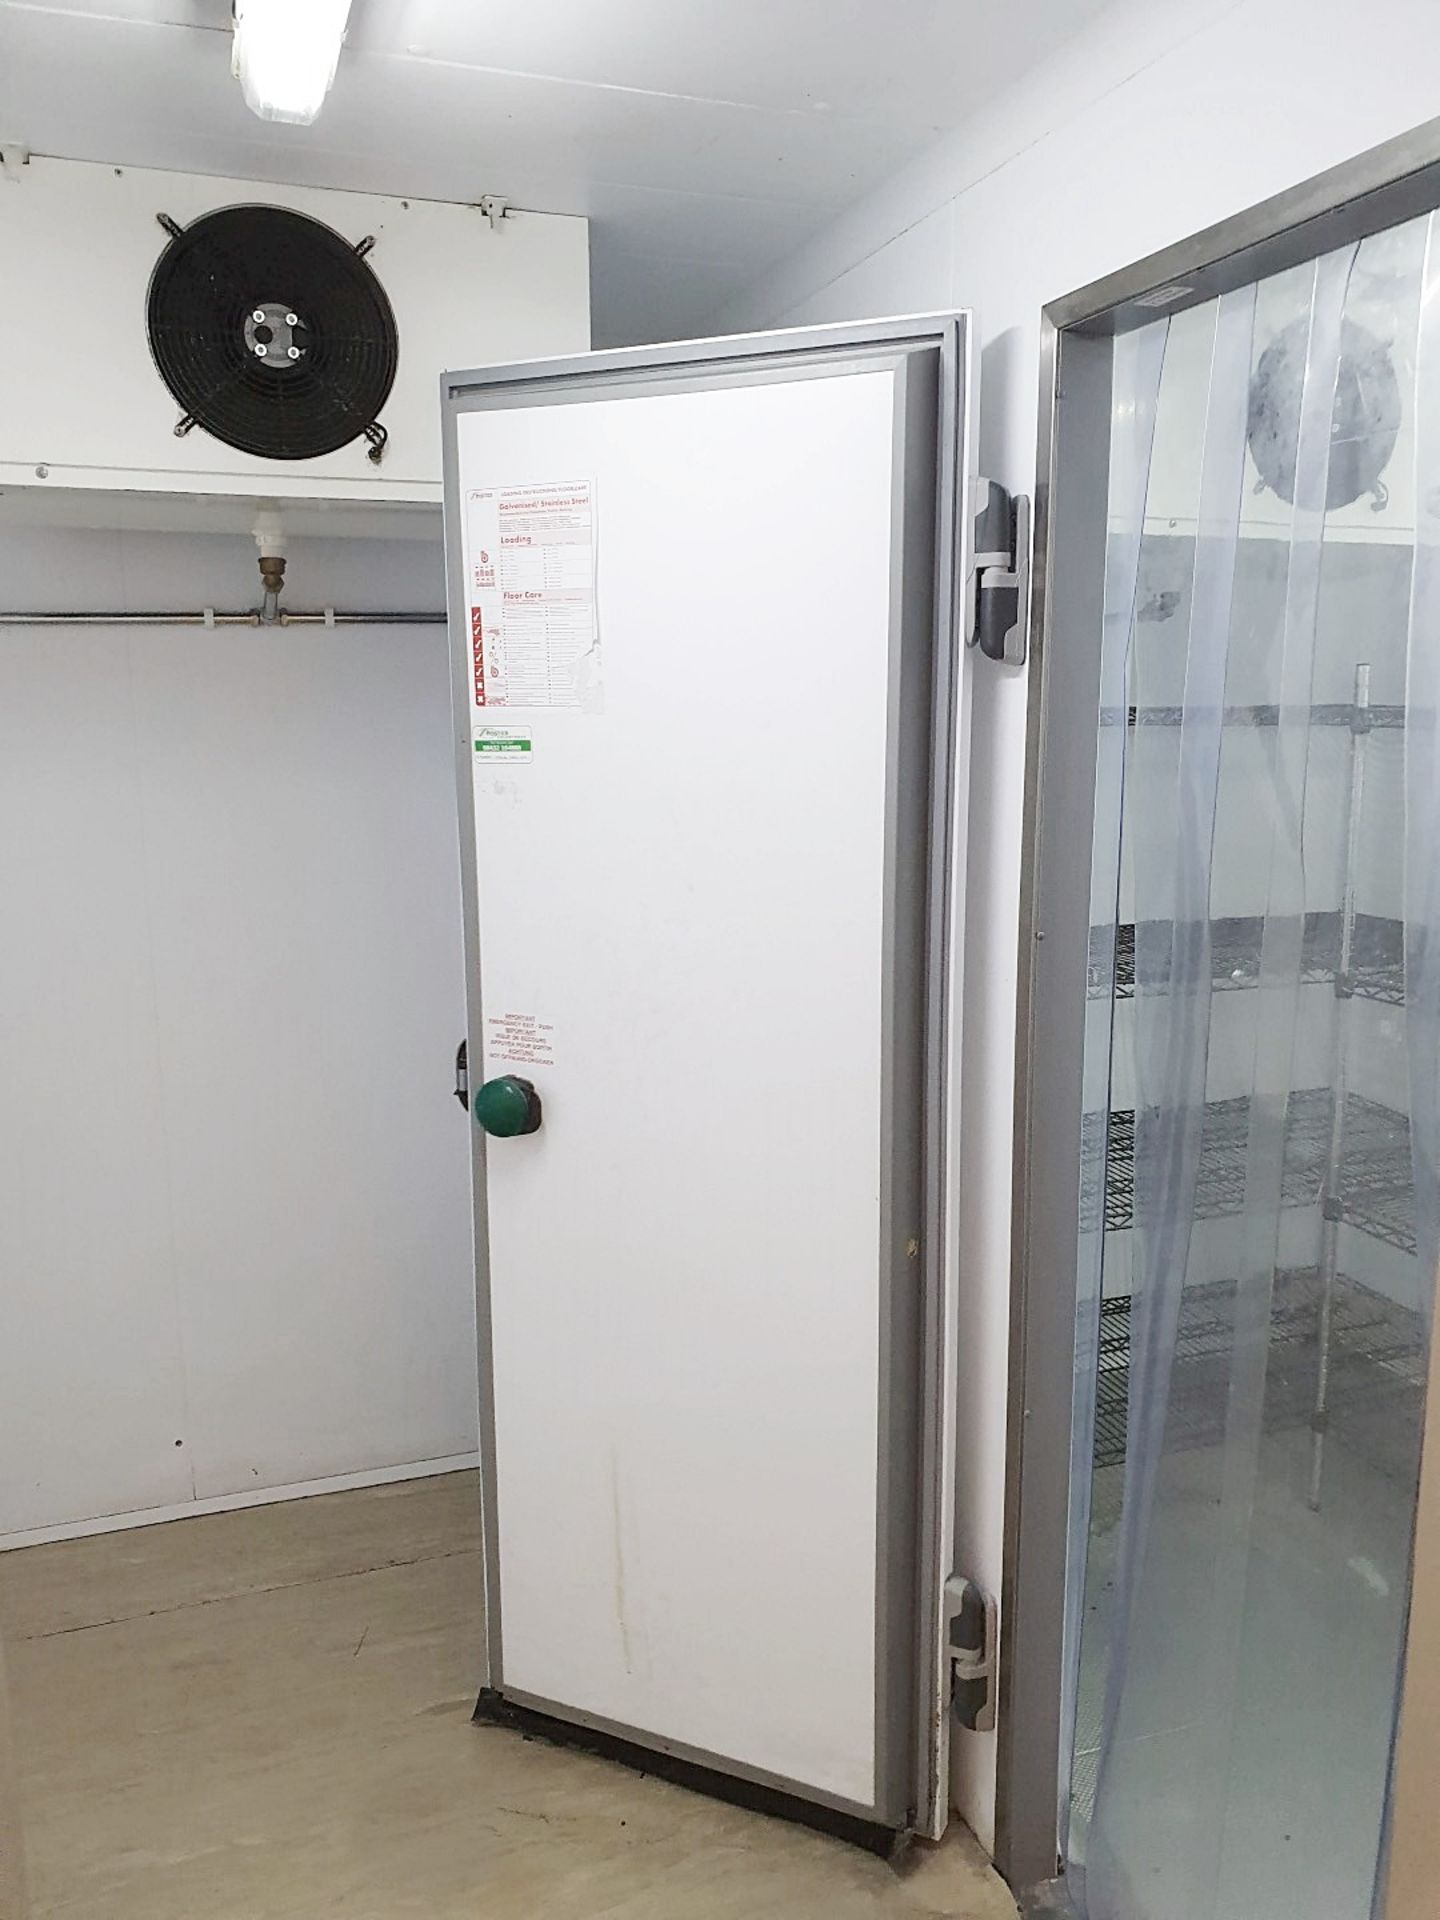 1 x Foster Walk In Double Room Freezer - Includes Doors, Wall Panels, KEC20-6L Condenser and Cold - Image 14 of 23